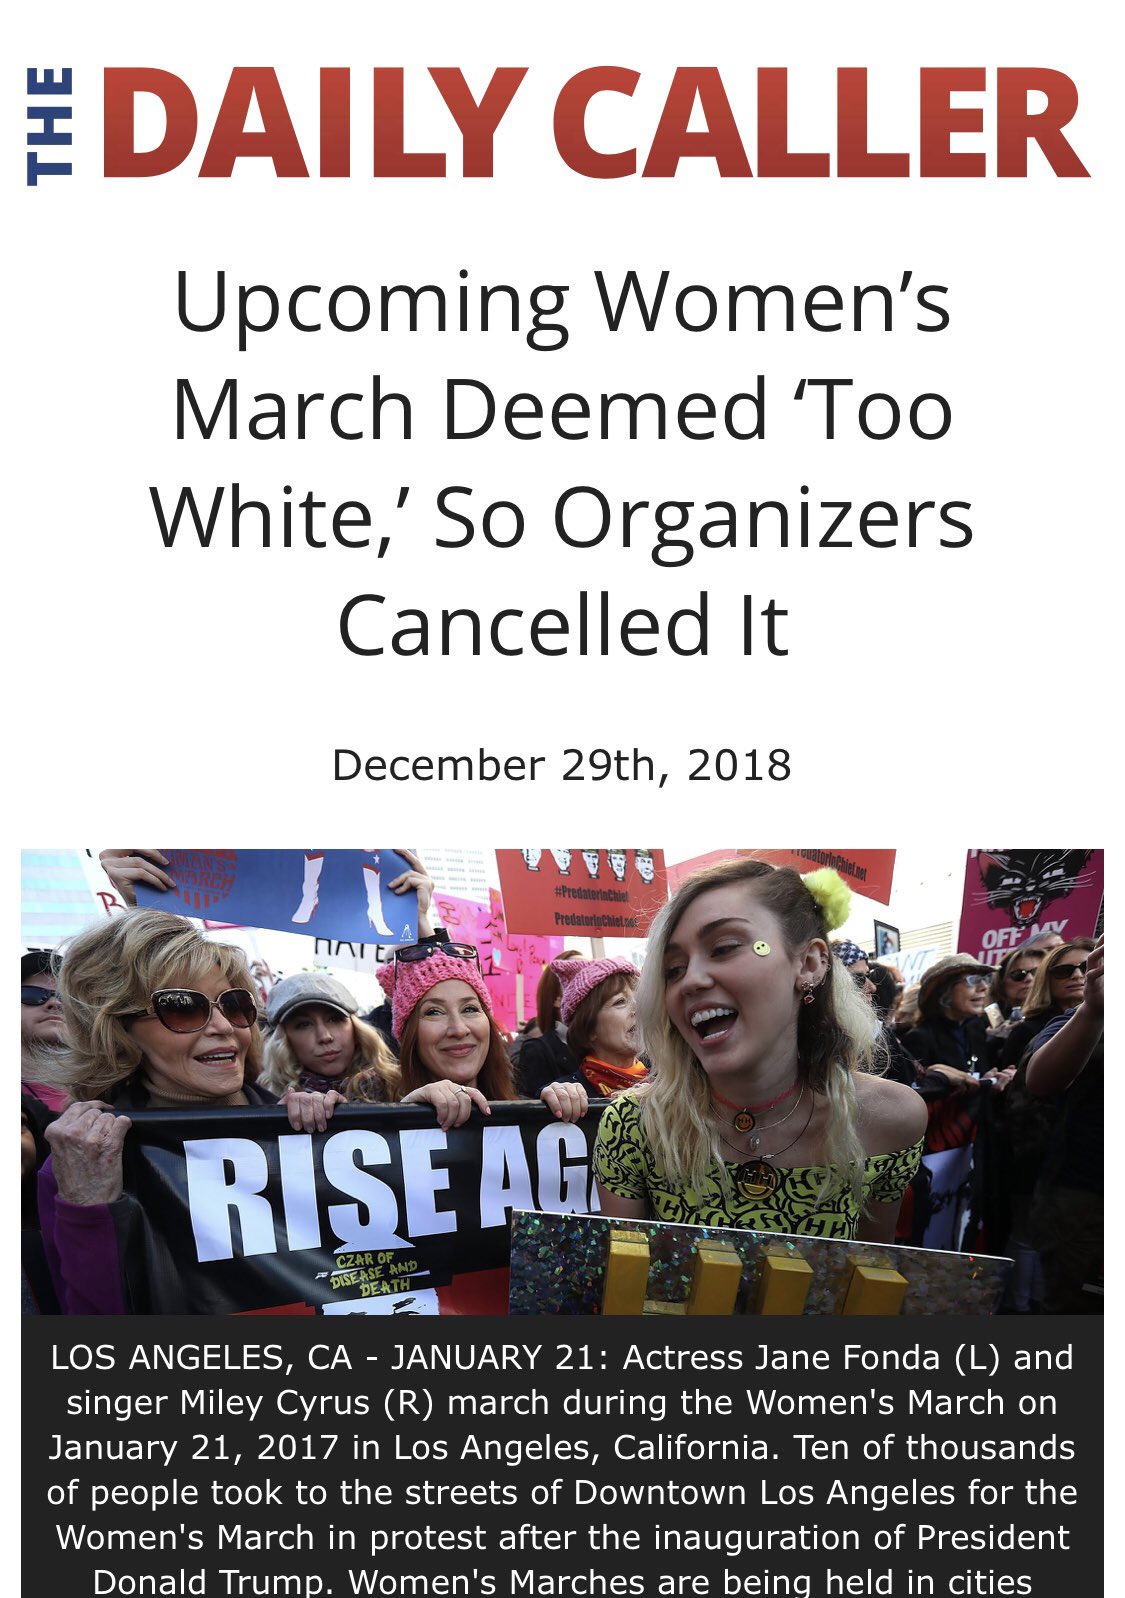 womens march too white 2018-12-29 4j3Qk